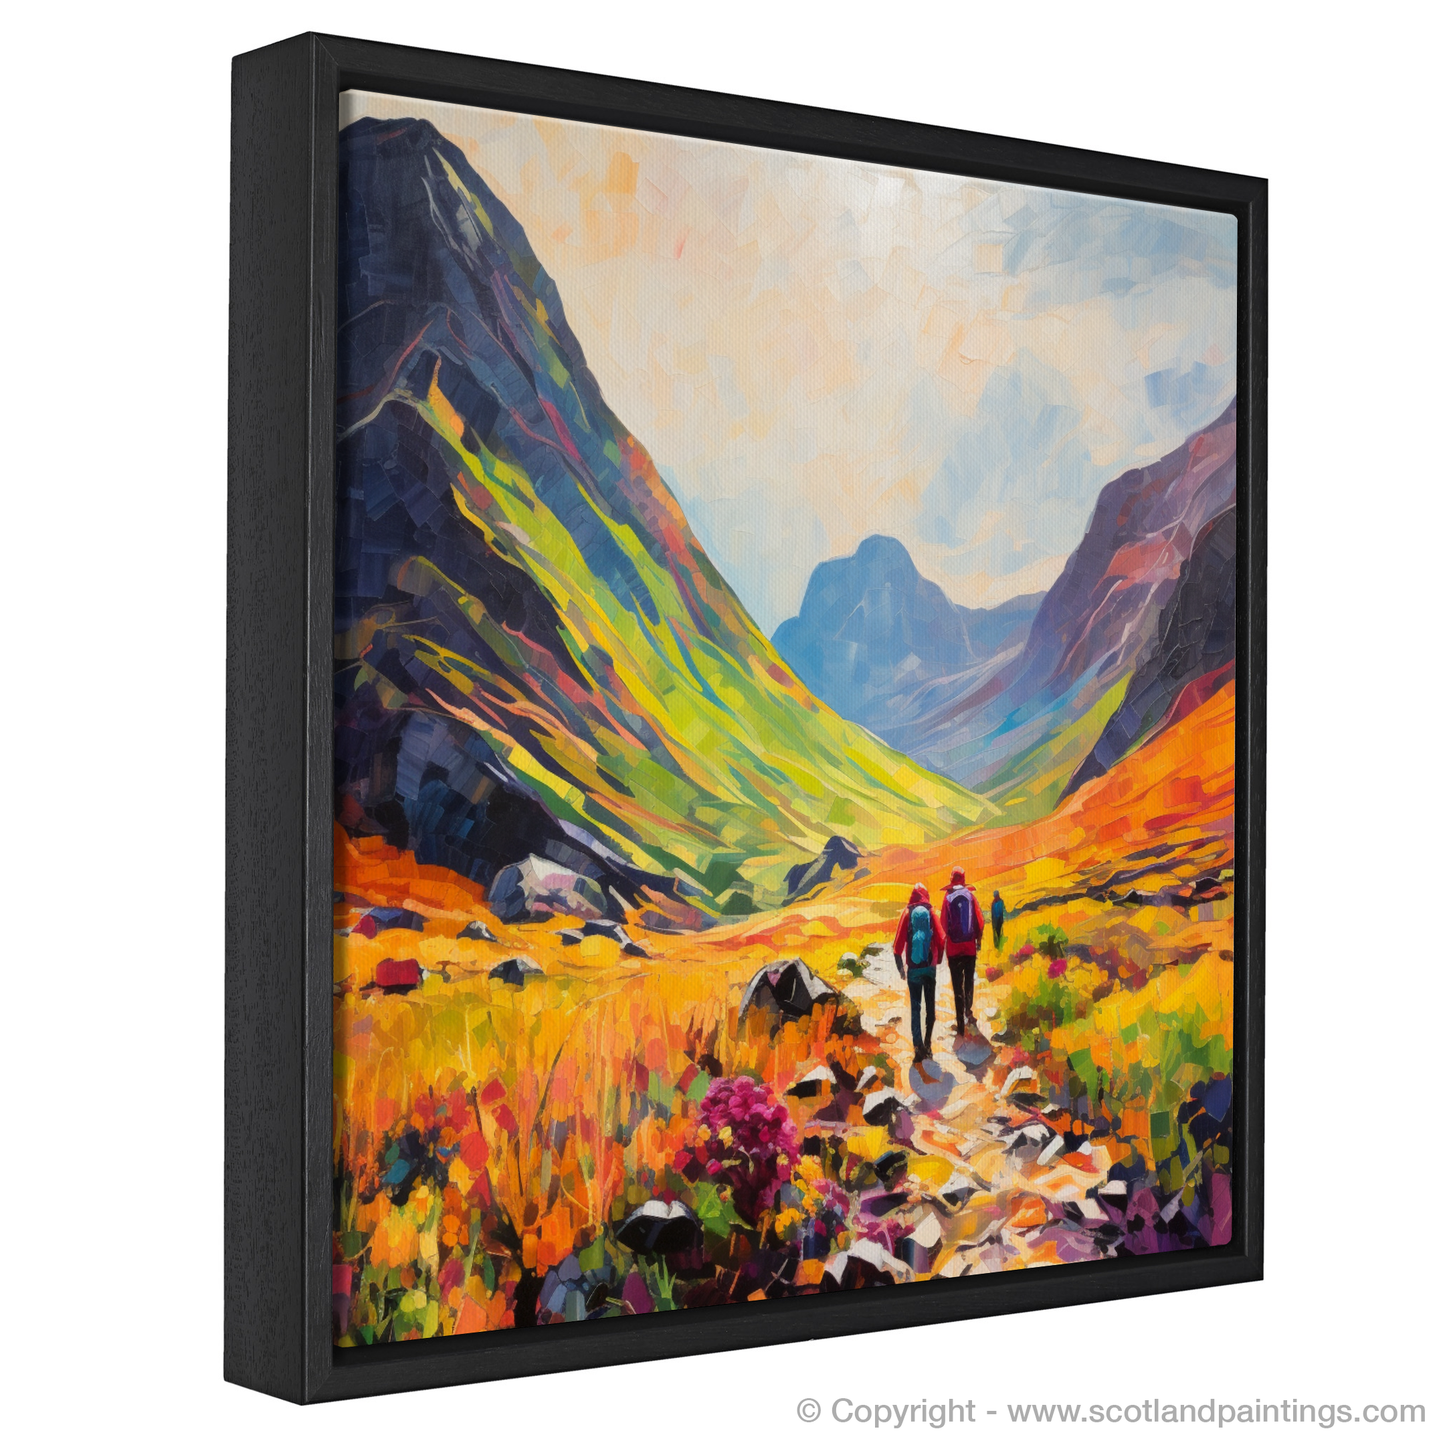 Painting and Art Print of Walkers in Glencoe during summer entitled "Summer Trek through Colorful Glencoe".